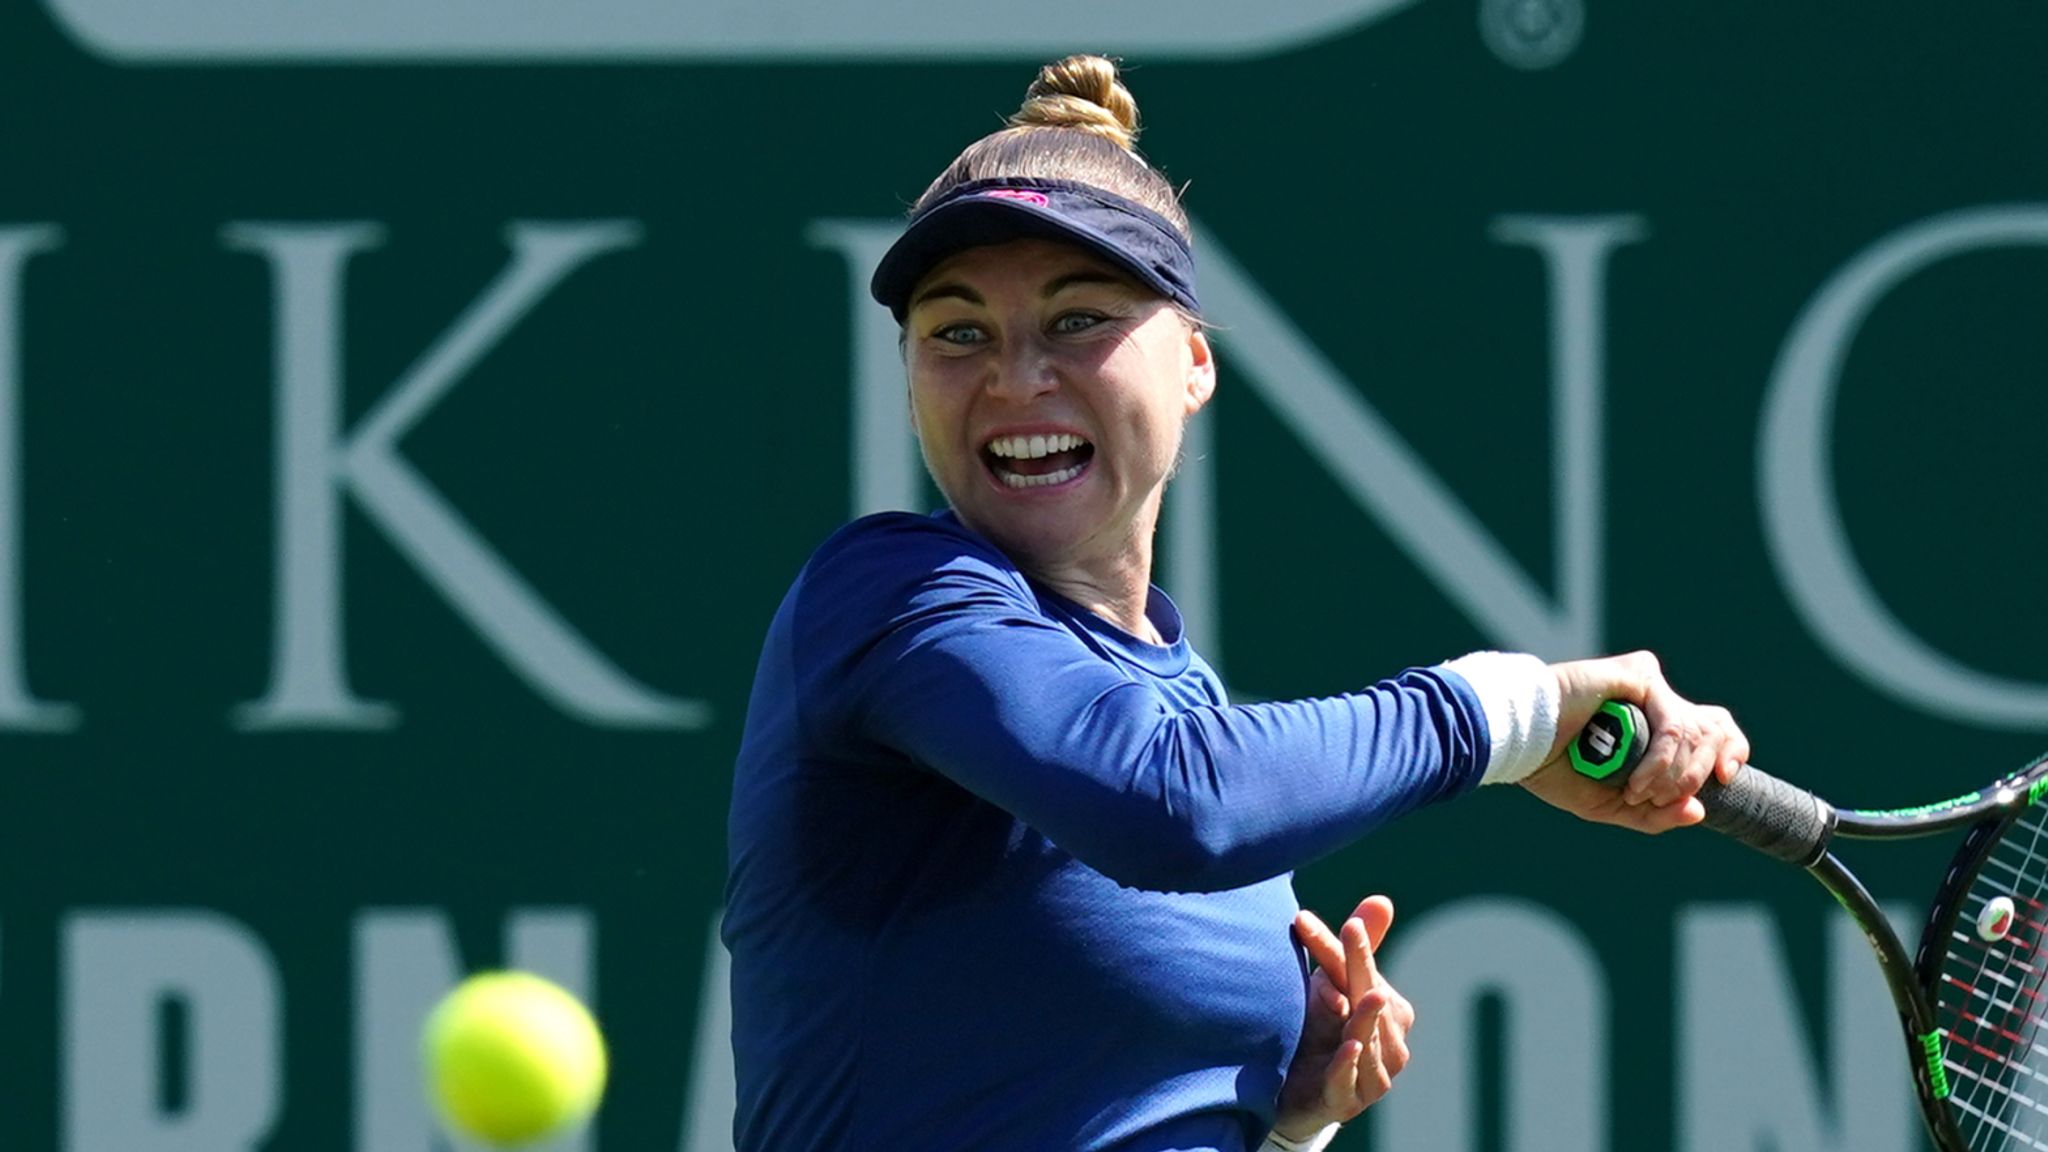 Vera Zvonareva Russian player is barred from entering Poland for Warsaw Open tournament Tennis News Sky Sports